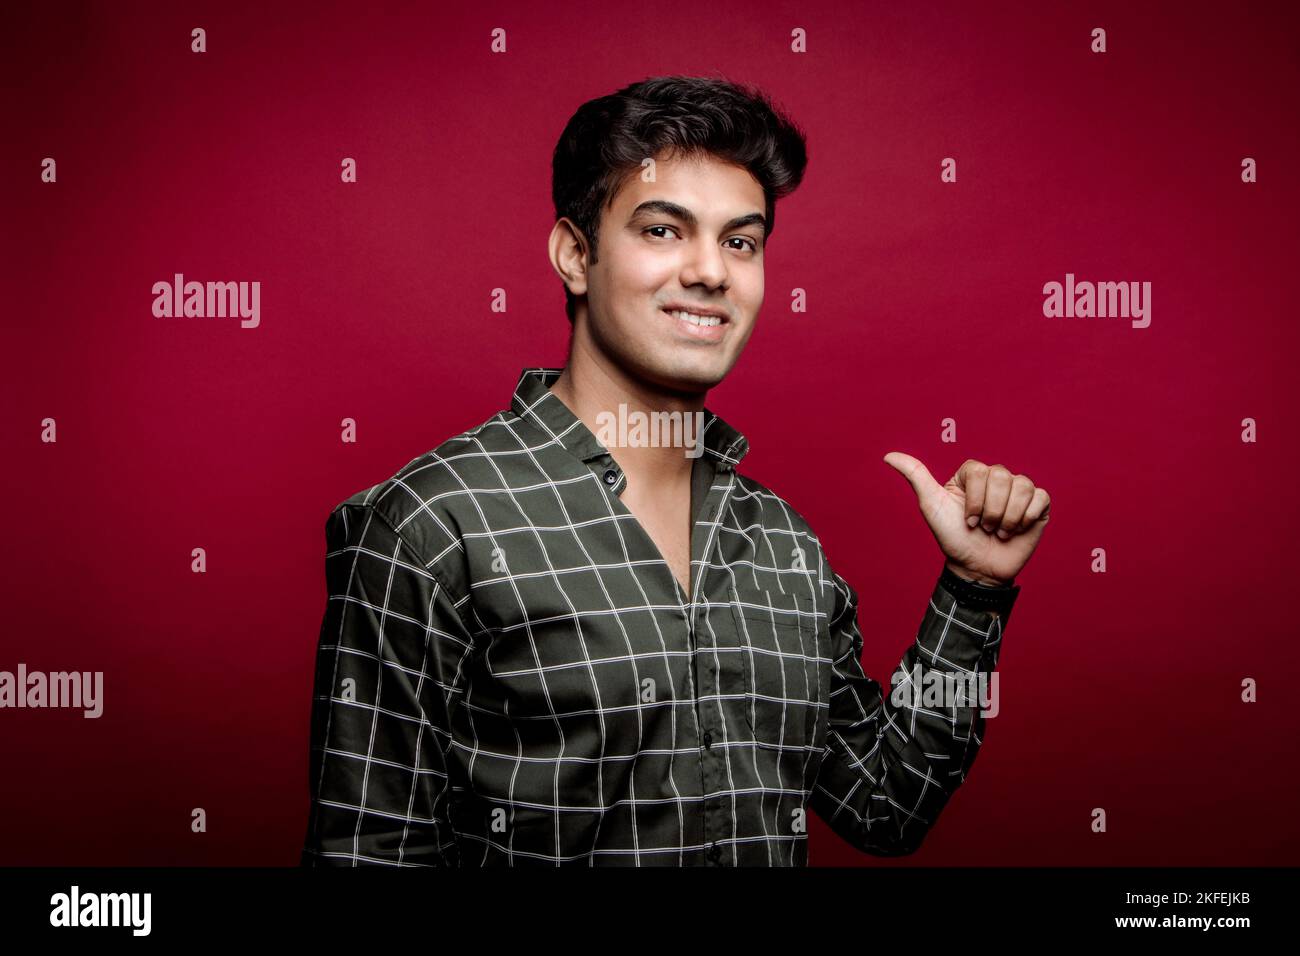 Portrait of smiling young Indian man wearing checkered shirt pointing thumb on himself looking at camera against red background Stock Photo